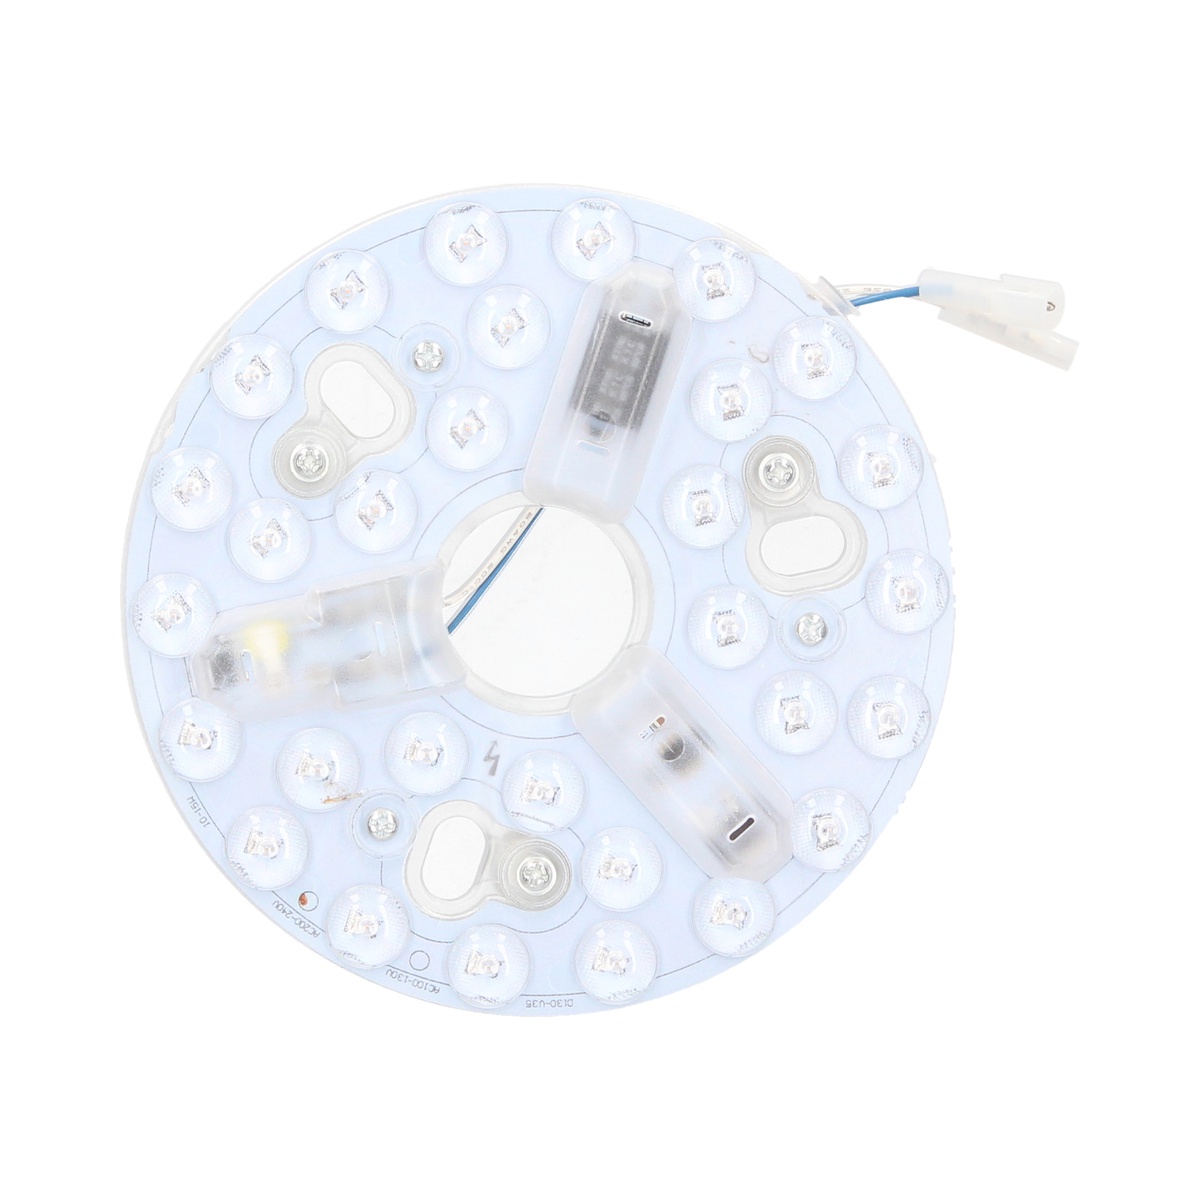 Spare LED board for Ref. 300005007